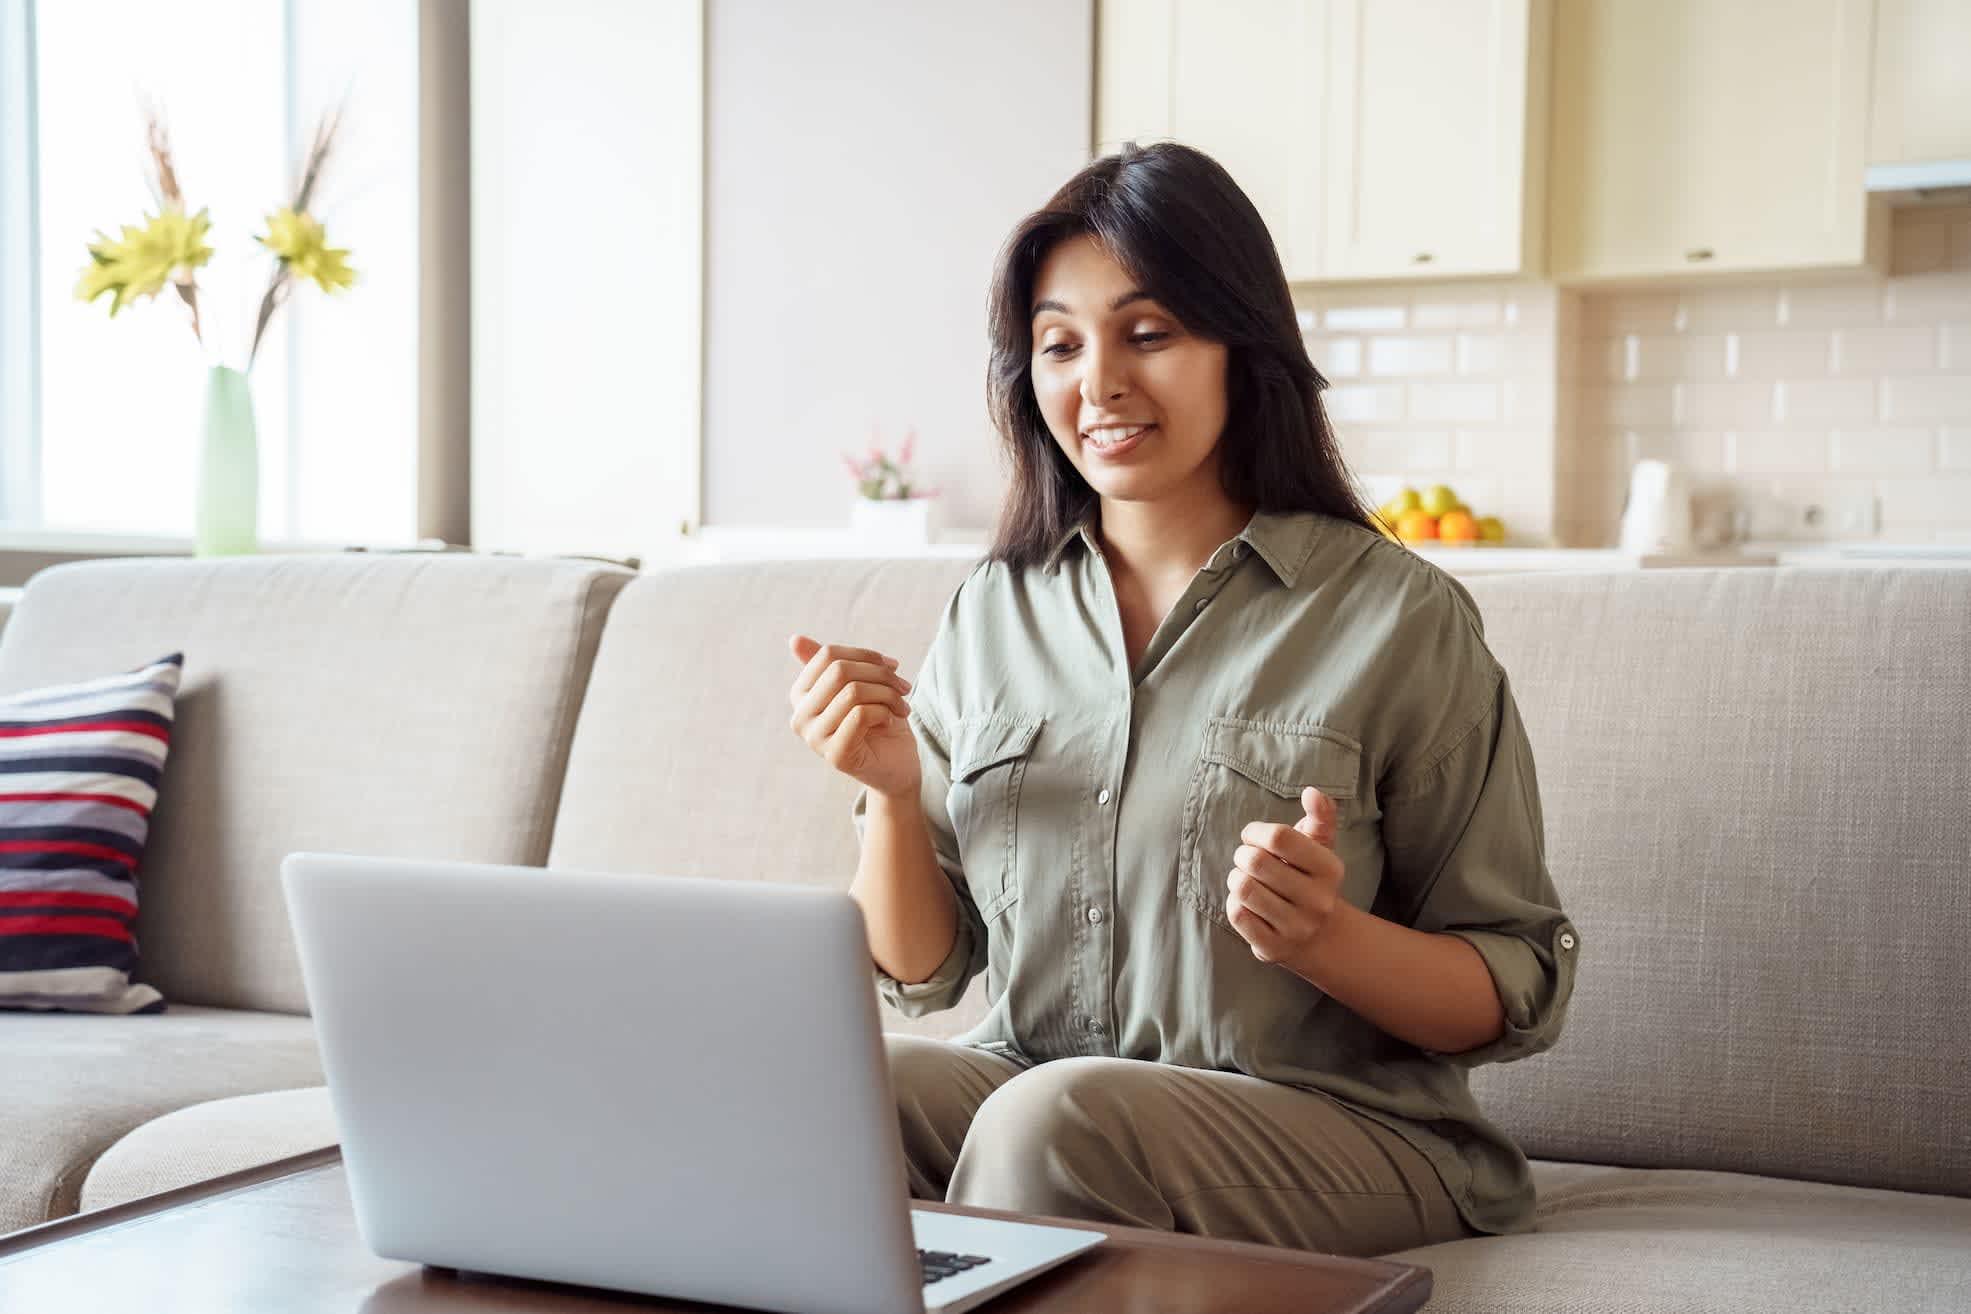 A woman being interviewed online at home